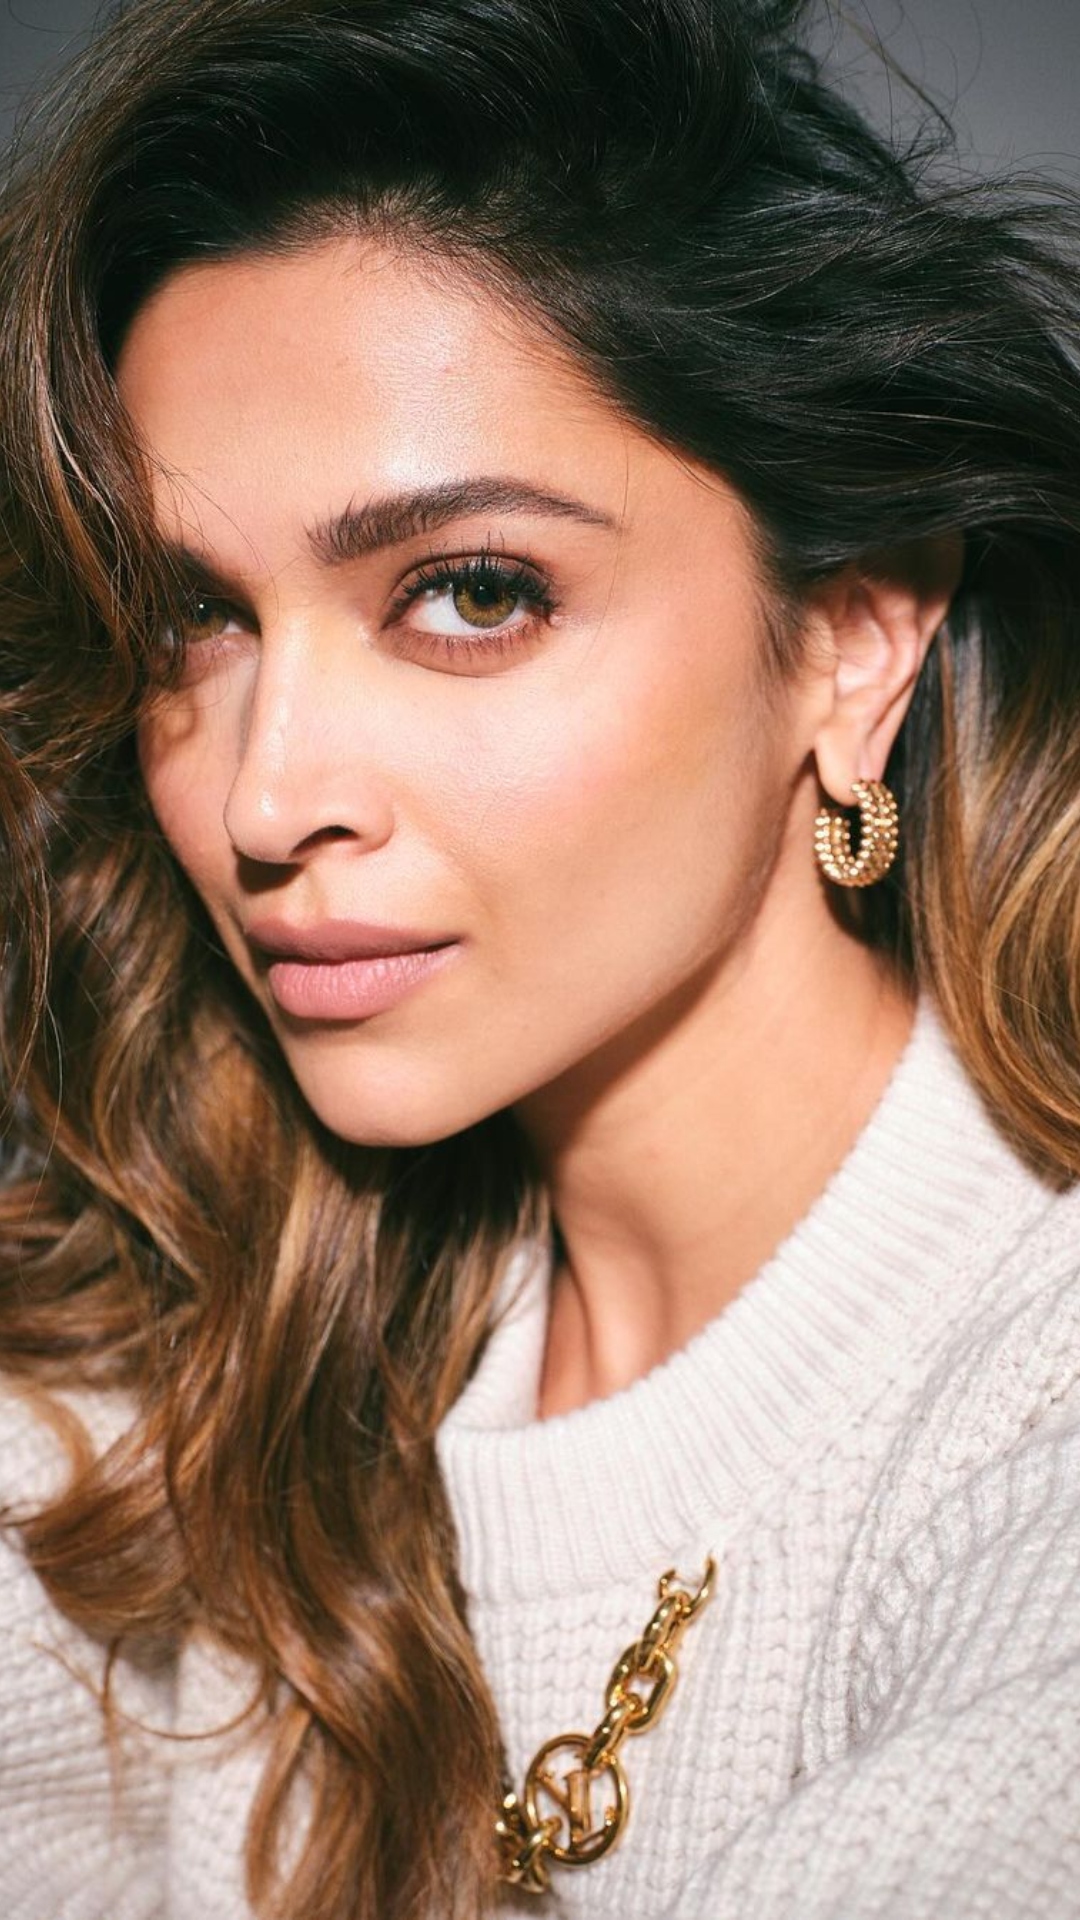 Deepika Padukone's 'Fighter' promotional look is comfy yet classy